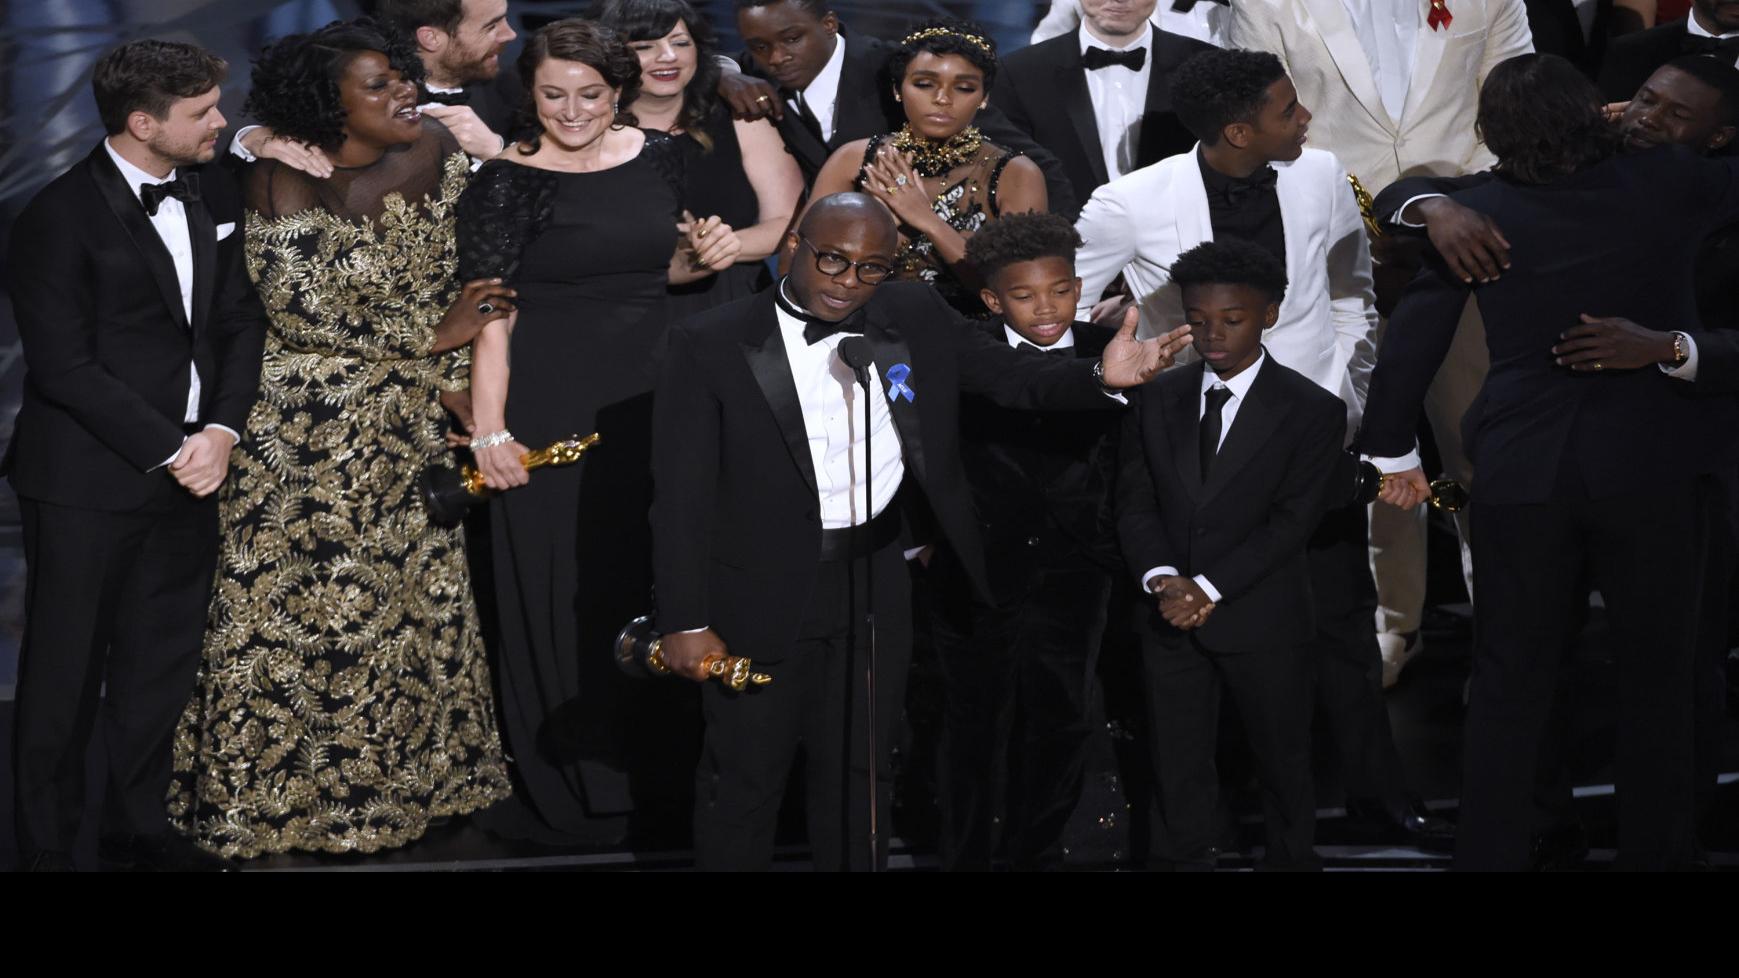 Take two: 'Moonlight' wins best picture at Academy Awards, News